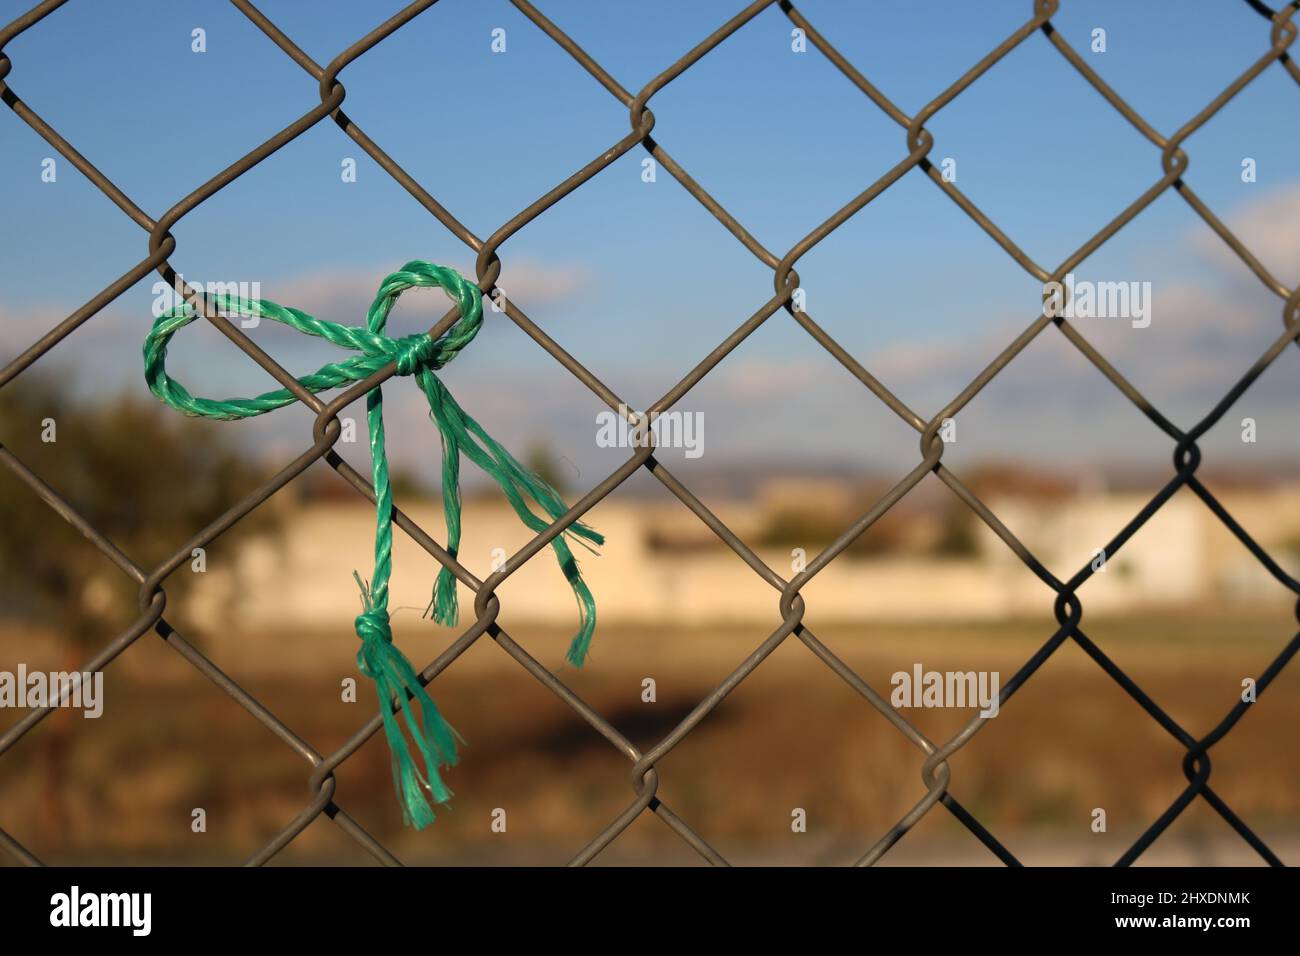 Rope symbolizing peace tied to wire mesh Stock Photo